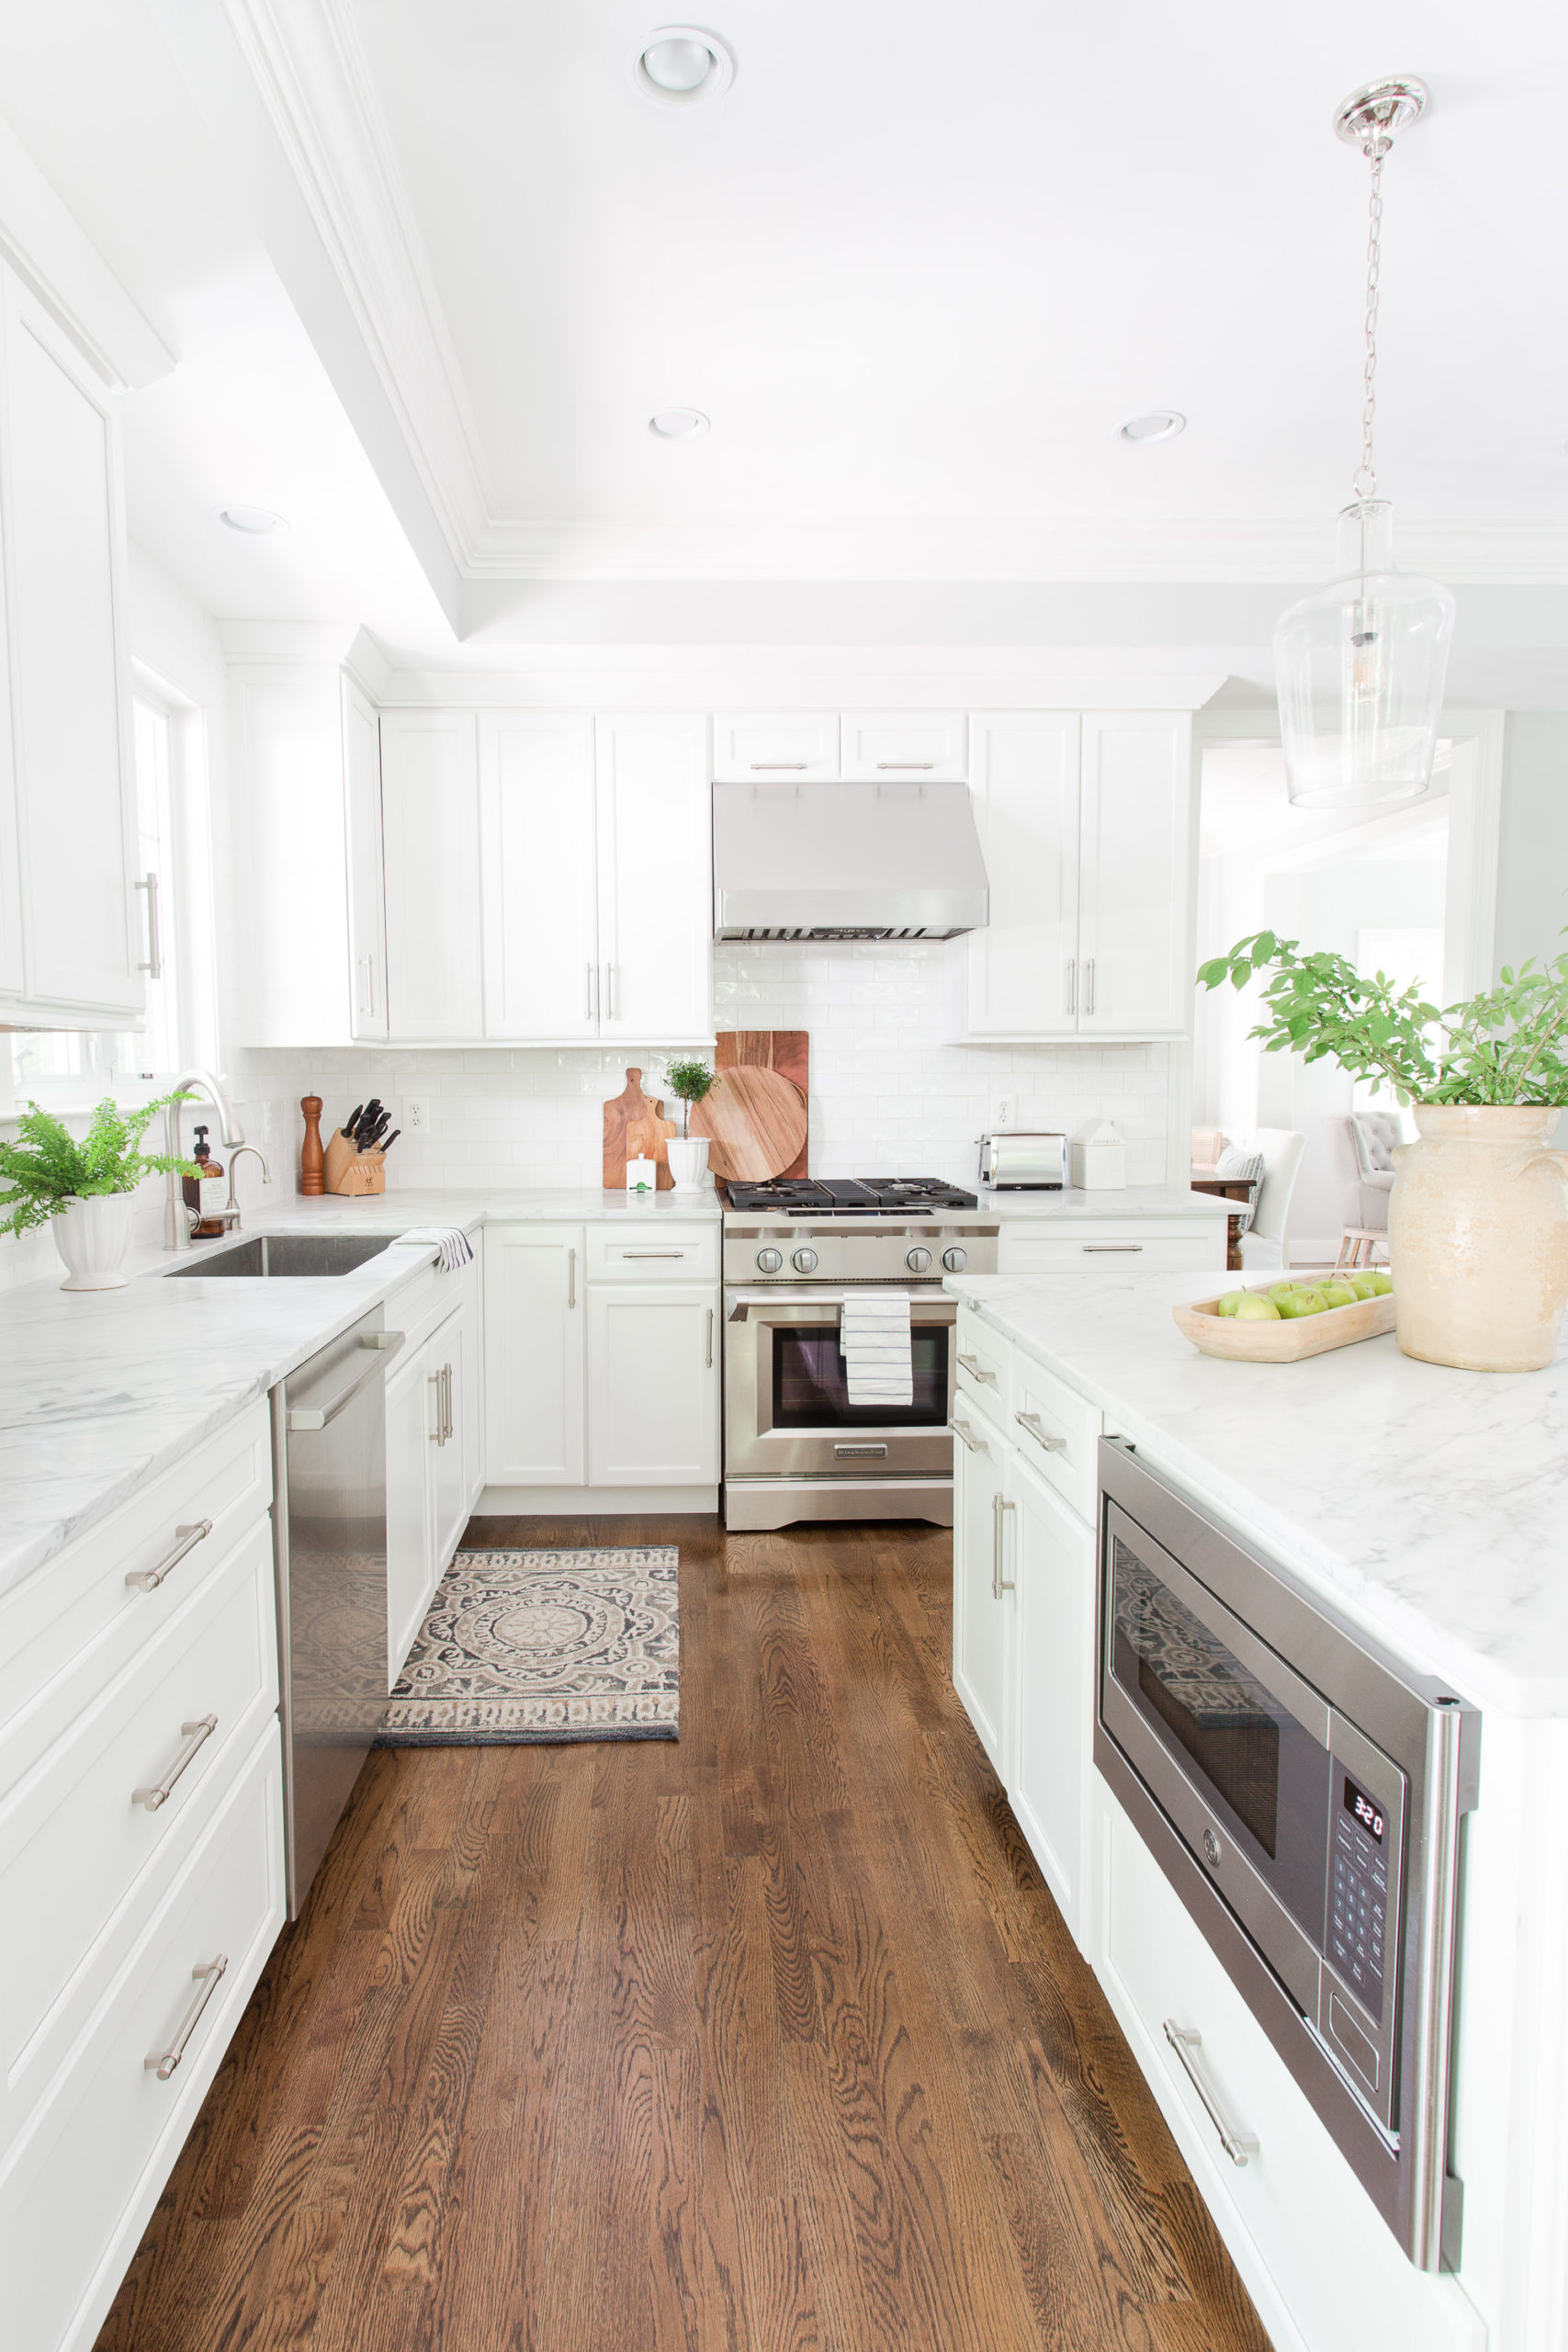 White kitchen with dark wood floors with microwave in island and stainless steel range with vase of greenery on island